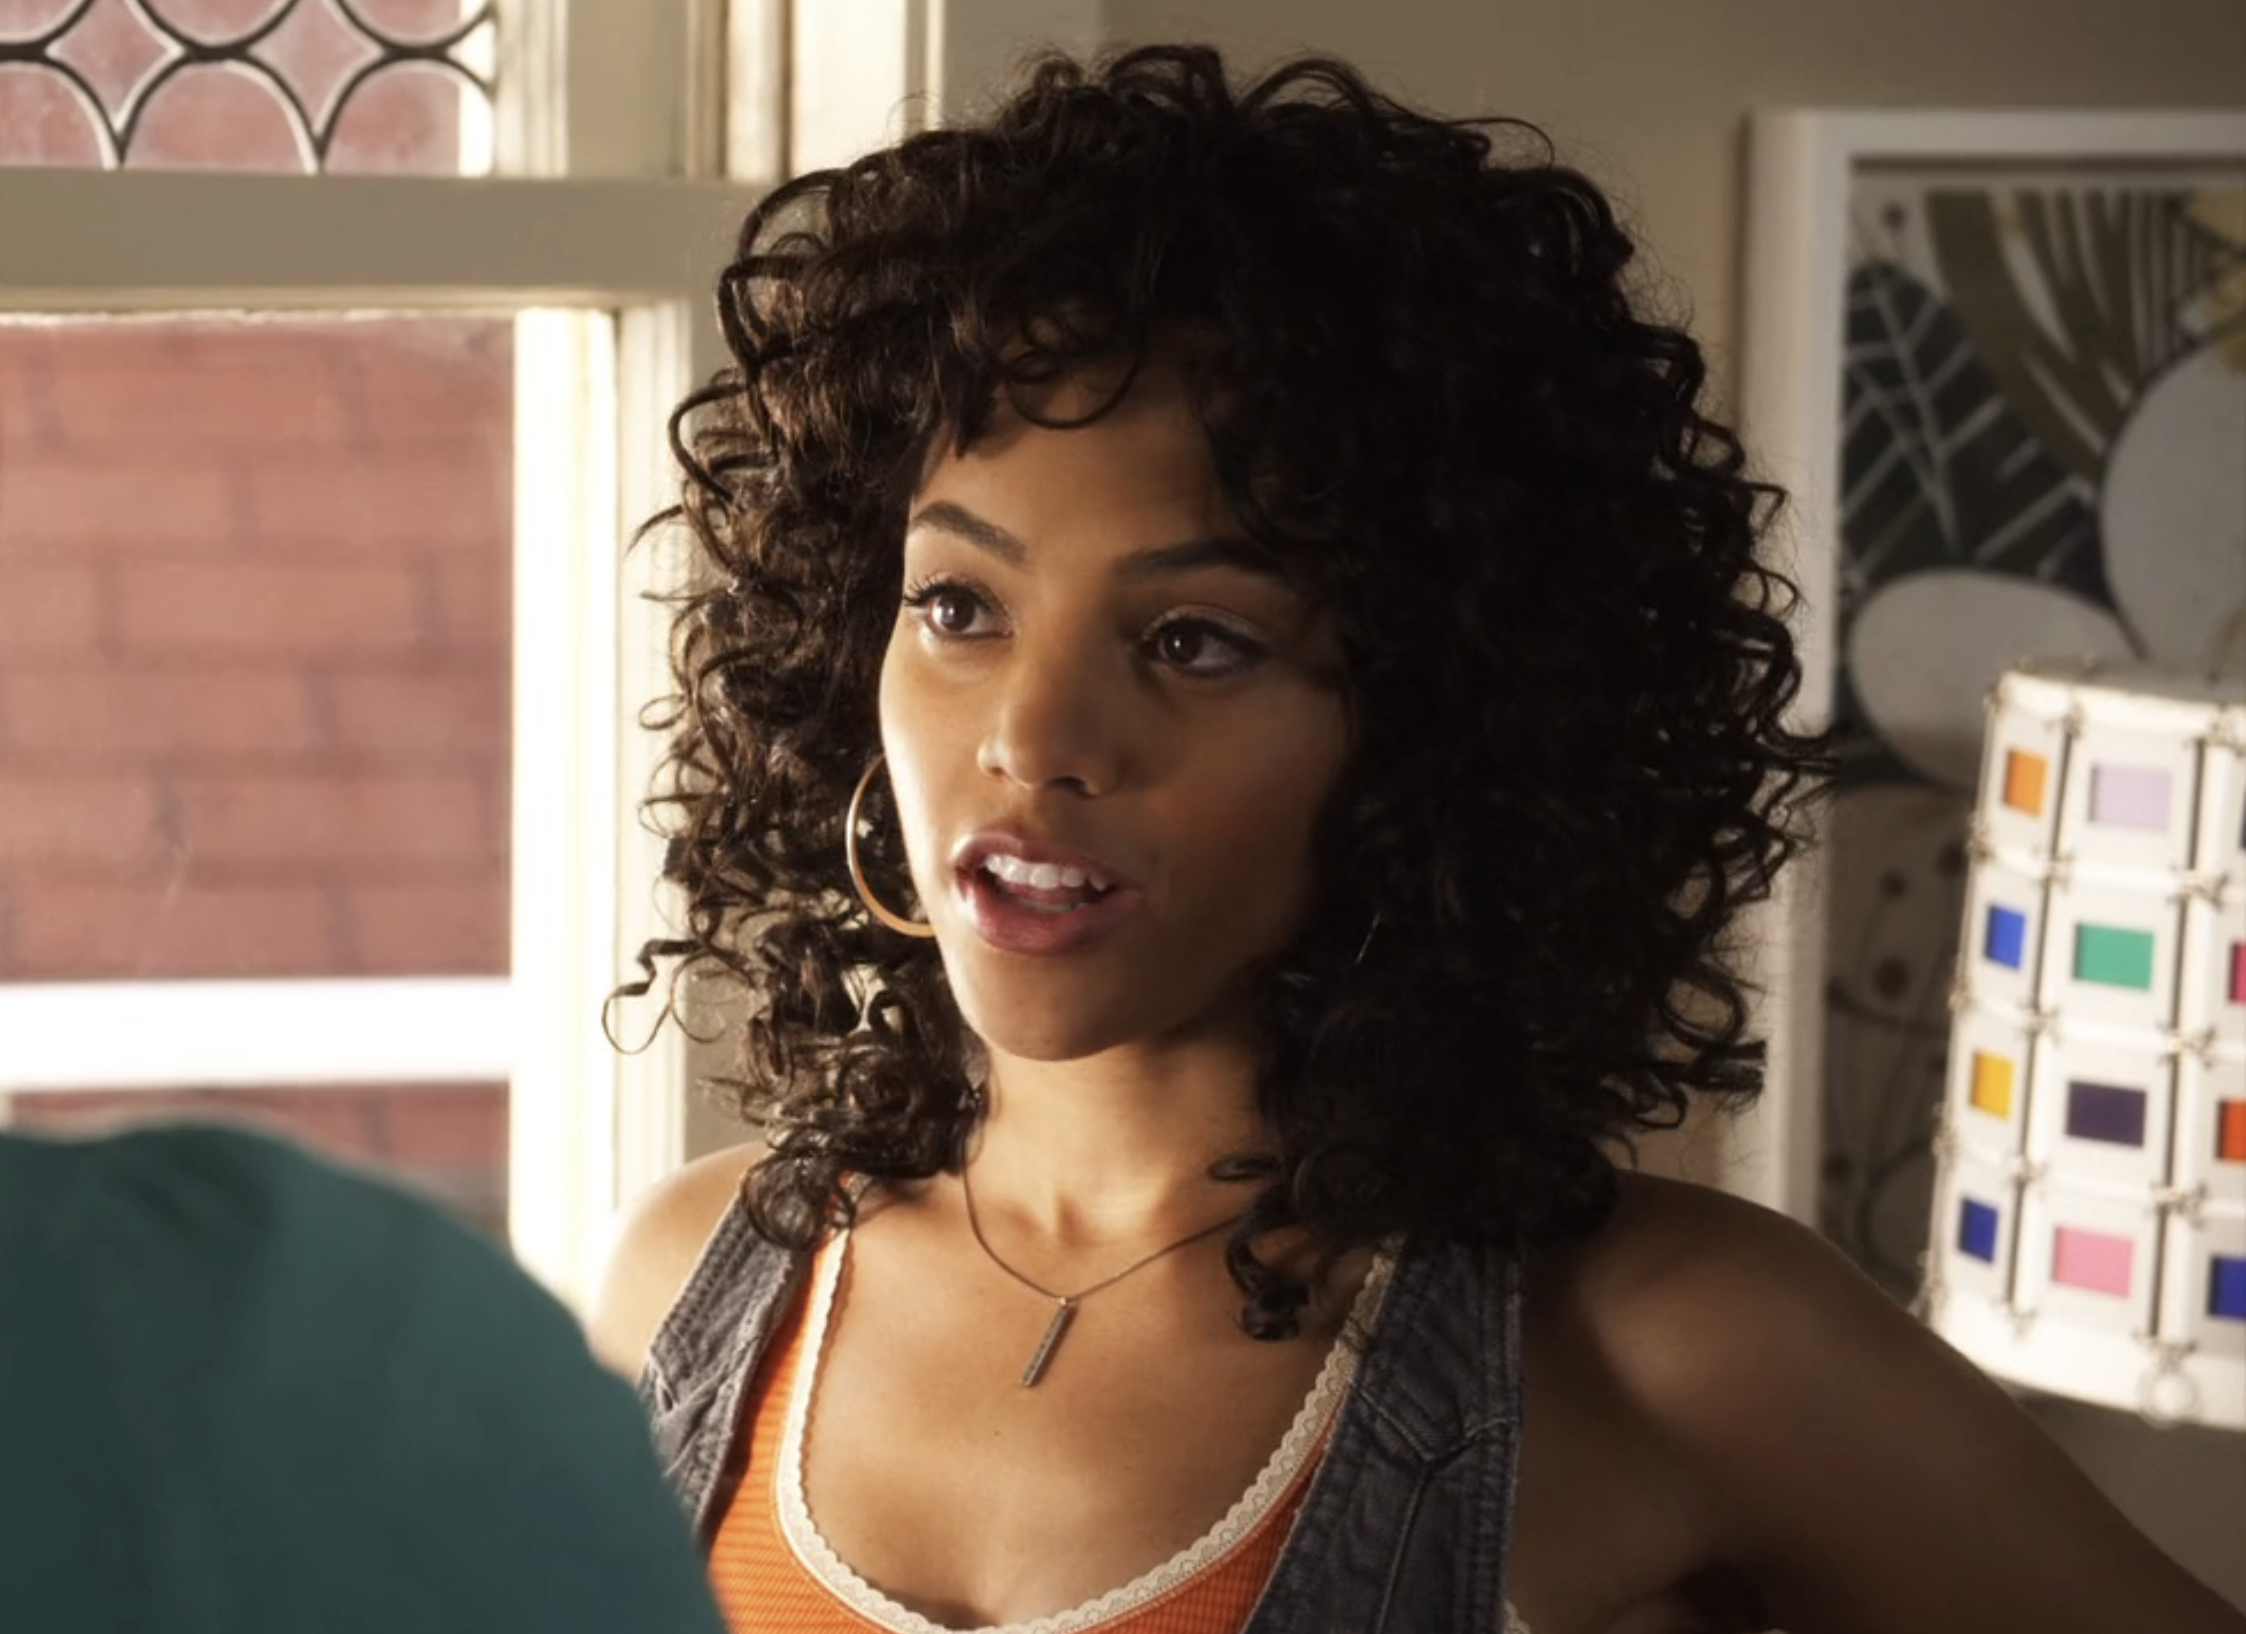 Bianca as Maya with curly hair, tank top, and necklace, indoors near color swatches